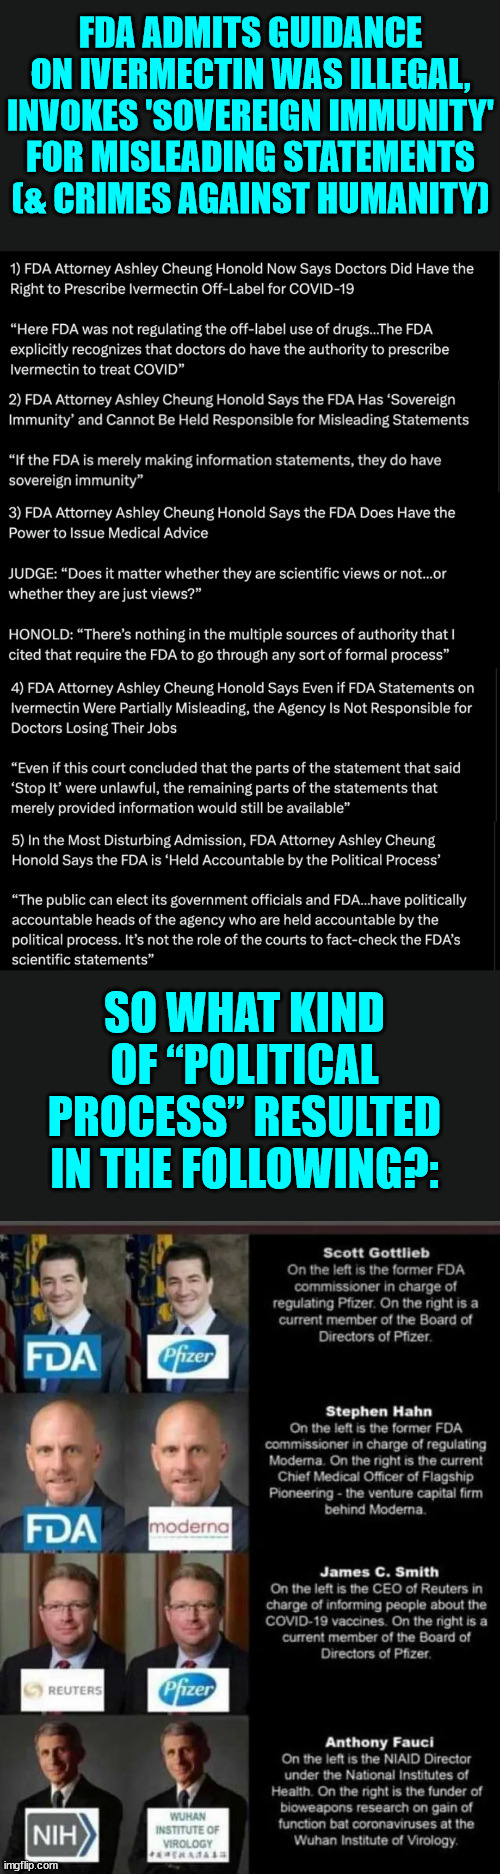 FDA admits the truth | FDA ADMITS GUIDANCE ON IVERMECTIN WAS ILLEGAL, INVOKES 'SOVEREIGN IMMUNITY' FOR MISLEADING STATEMENTS (& CRIMES AGAINST HUMANITY); SO WHAT KIND OF “POLITICAL PROCESS” RESULTED IN THE FOLLOWING?: | image tagged in covid,truth,government corruption | made w/ Imgflip meme maker